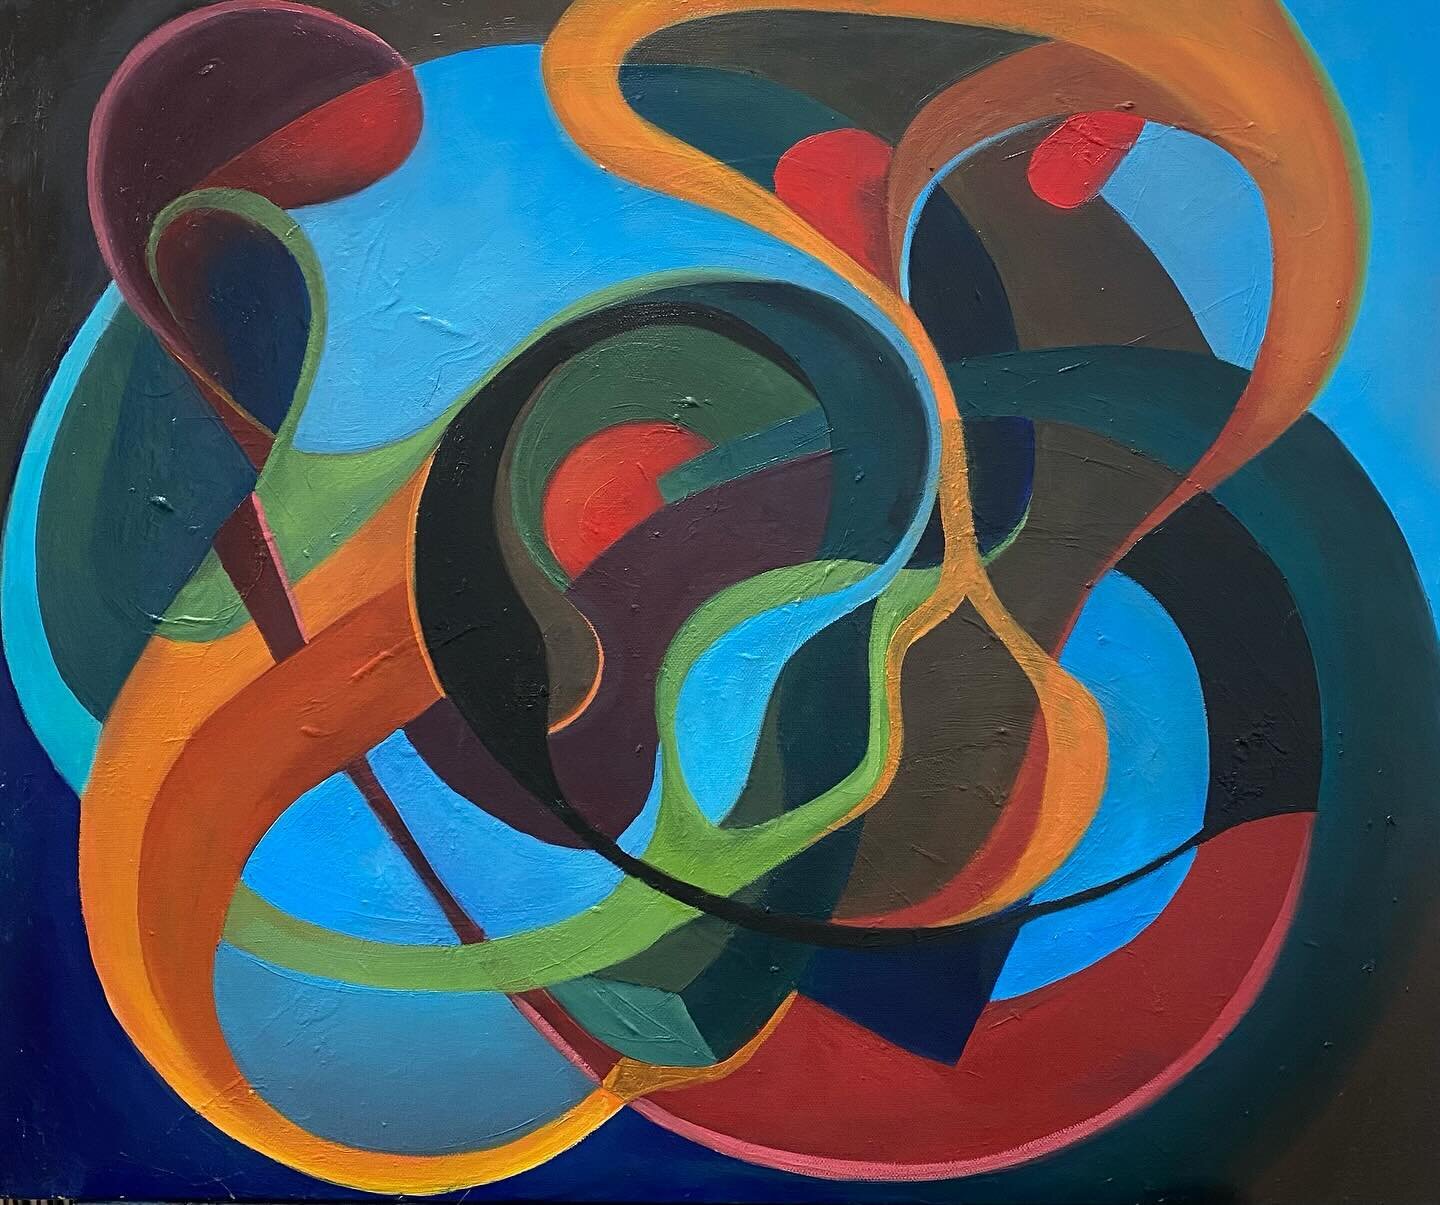 Looped
60 x 50 cm
Oil on canvas 
2024
-
-
Celebrating the end of January with this decidedly wintery new painting. I was born in January and (weirdly) always liked this month. Never sad to see it go though, especially this year as I took on dry Janua